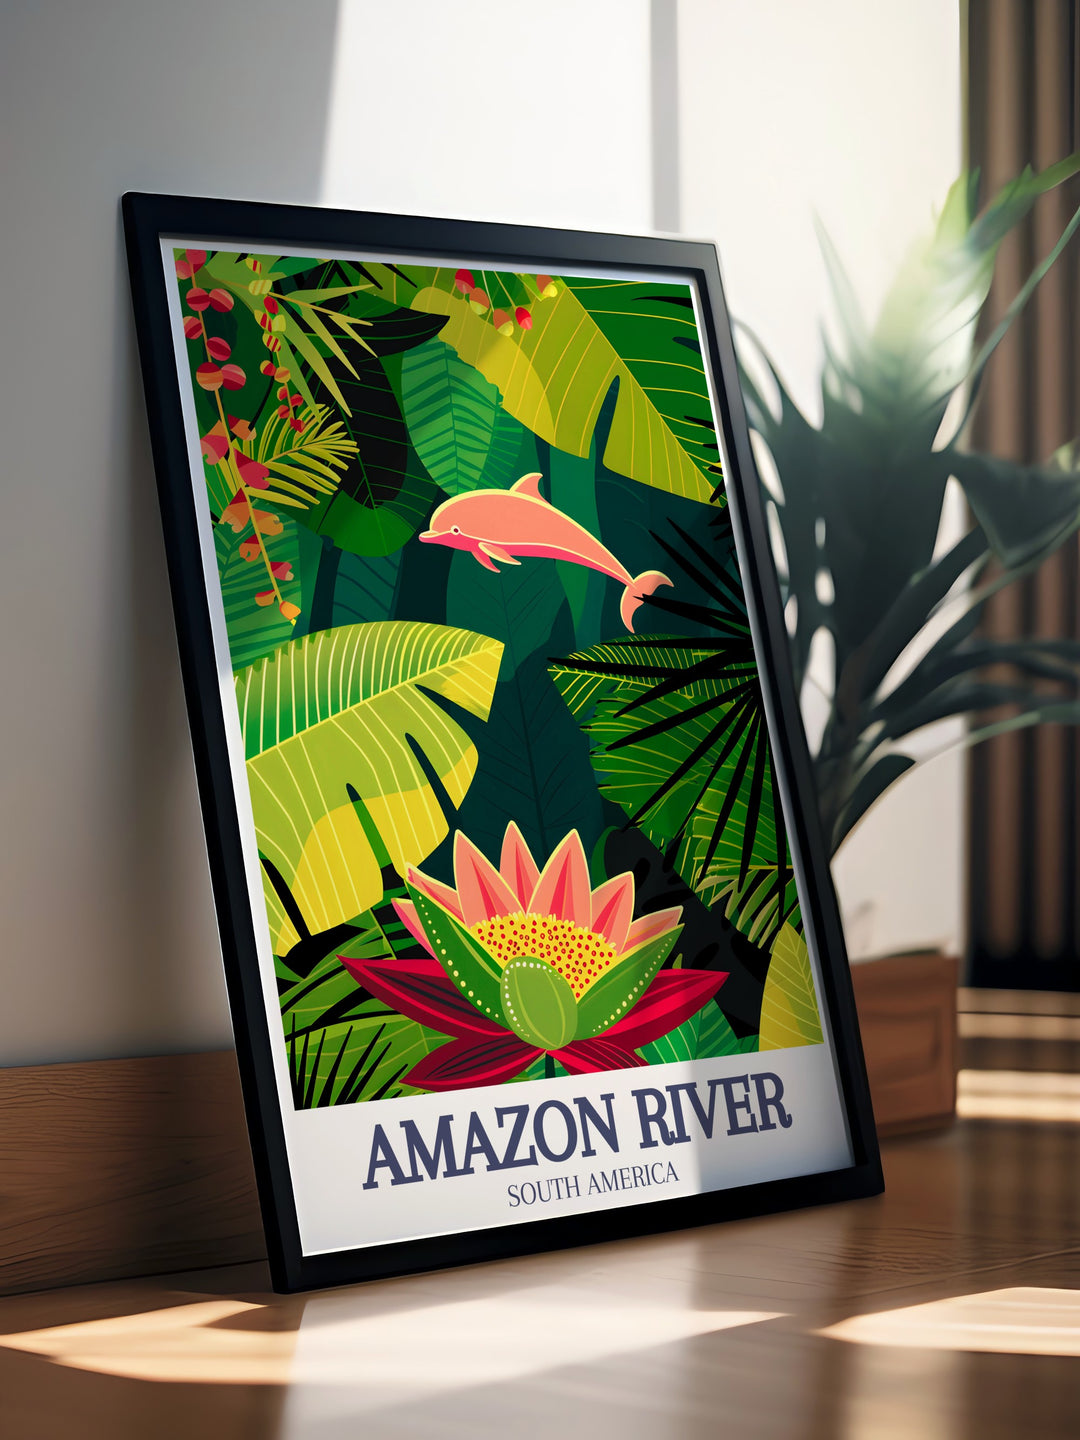 Stunning Victoria Regia water lily, Amazon river dolphin wall art perfect for nature enthusiasts. This travel poster features the majestic water lily and dolphin in a serene Amazon setting, adding a touch of tranquility and wonder to any room.